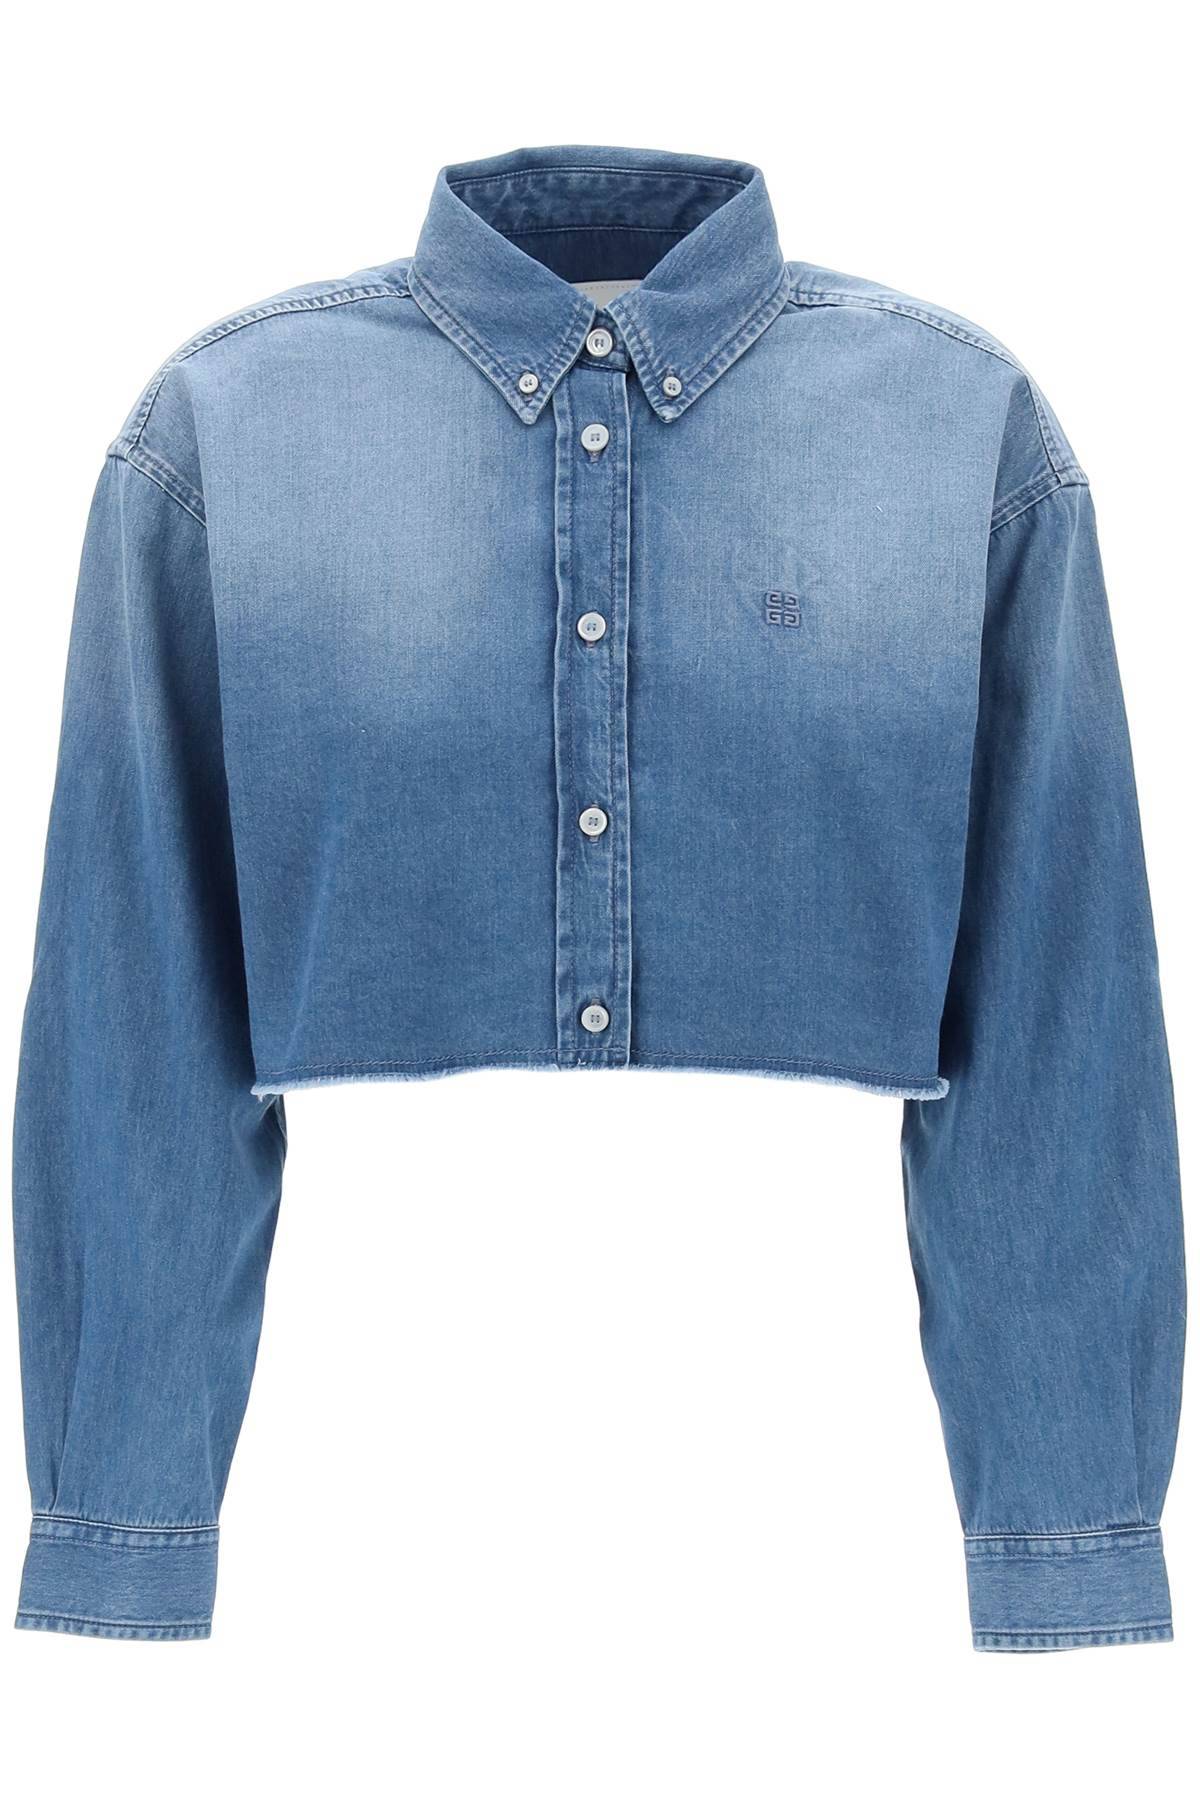 GIVENCHY denim cropped shirt for women